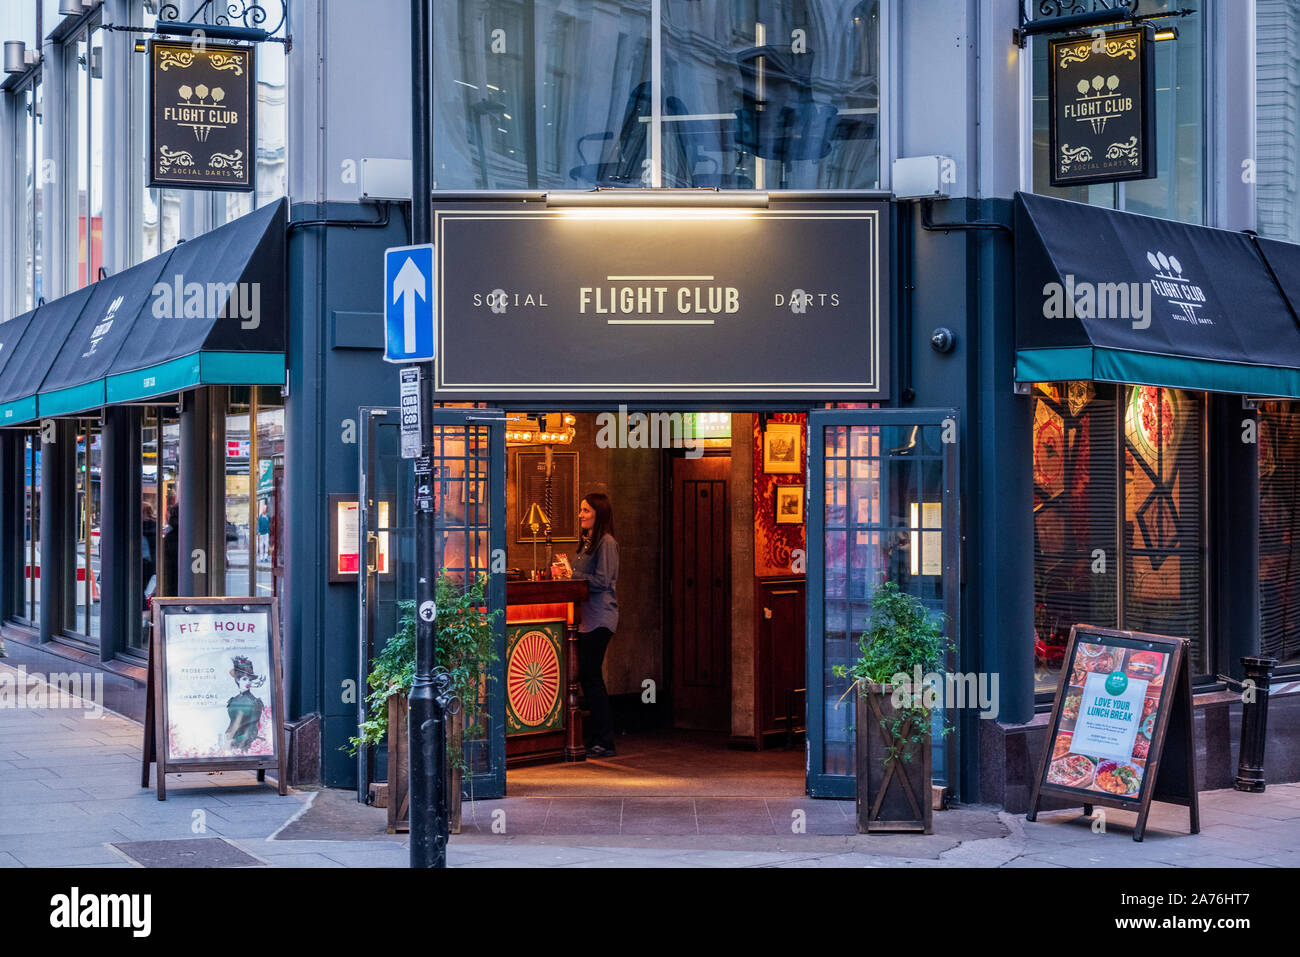 The Flight Club - a darts club and venue in Central London - Flight Club is the home of Social Darts. Stock Photo